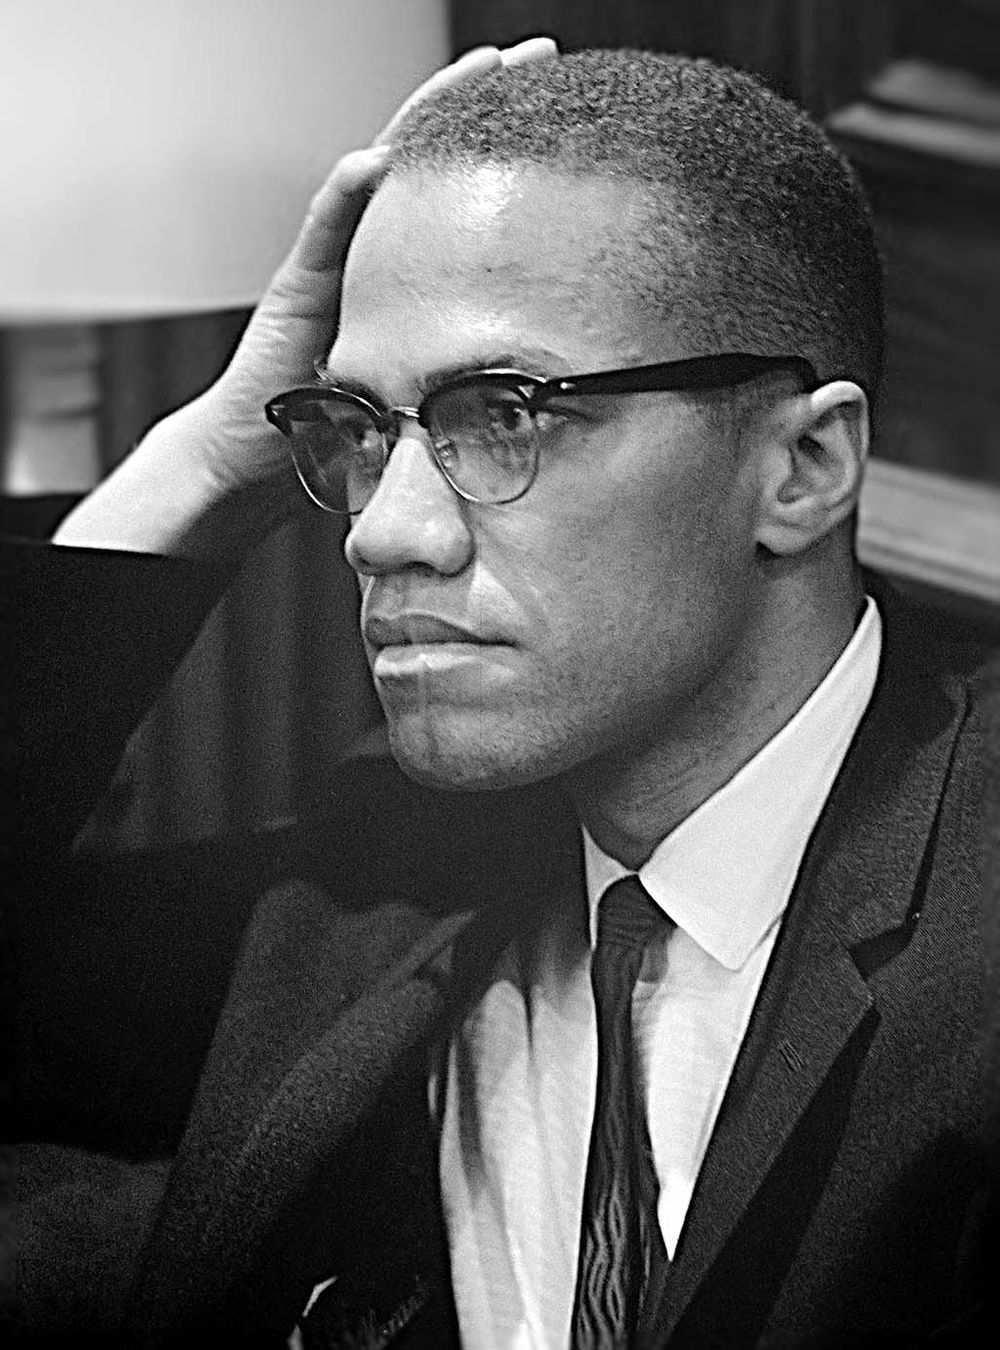 Malcolm X was the Voice of the Black Muslim Movement